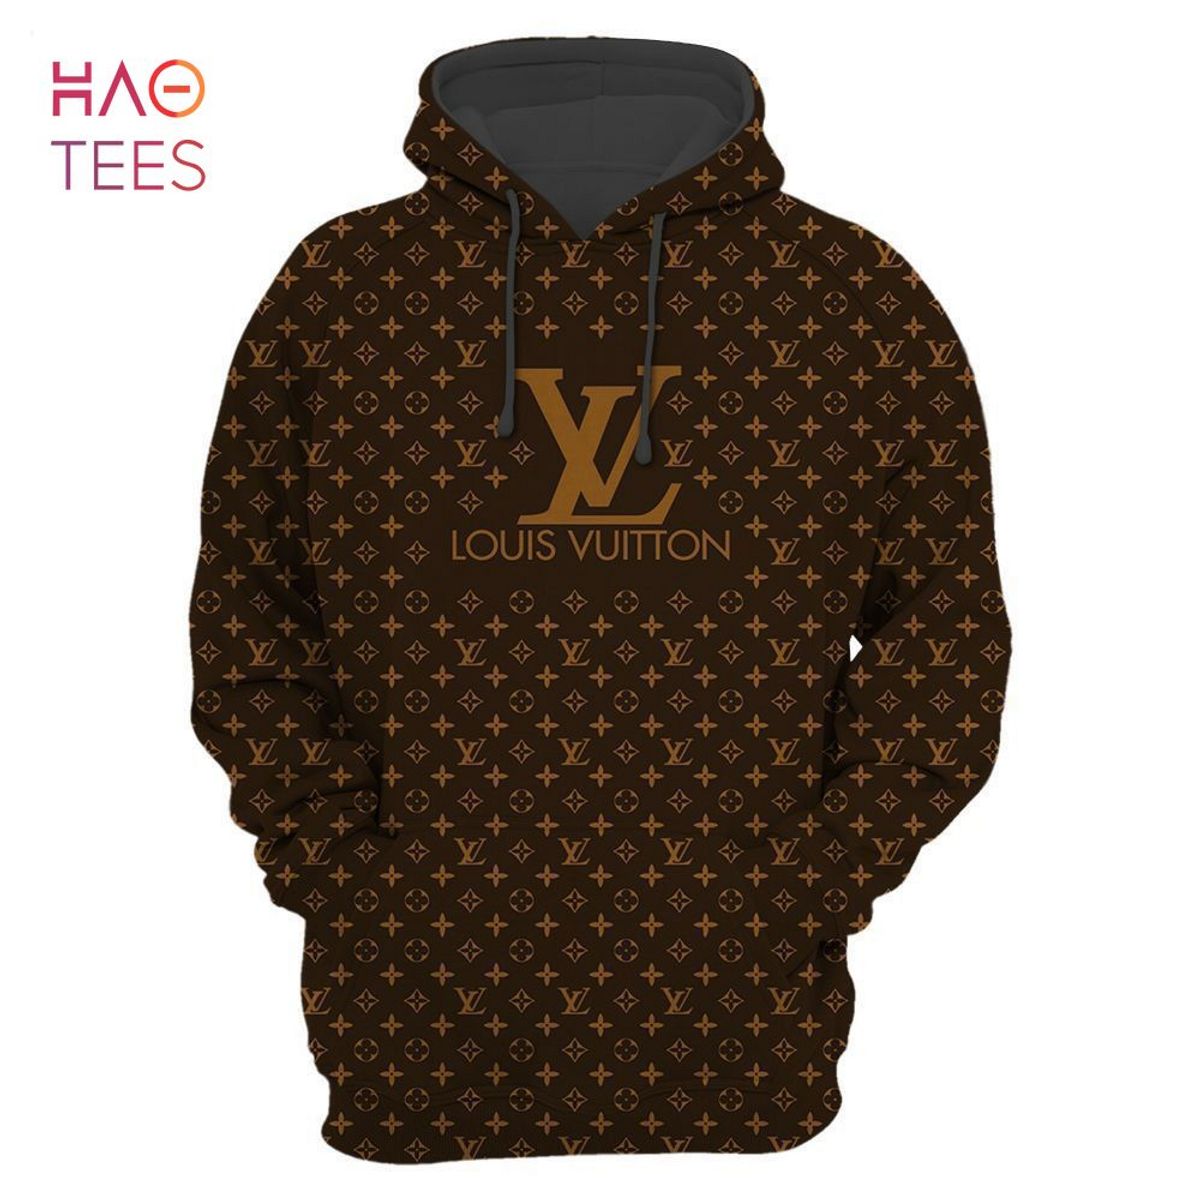 Retro Louis Vuitton Brown Hoodie Lv Luxury Brand Clothing Clothes Outfit  Hoodie Long Pants 3d Set - Family Gift Ideas That Everyone Will Enjoy